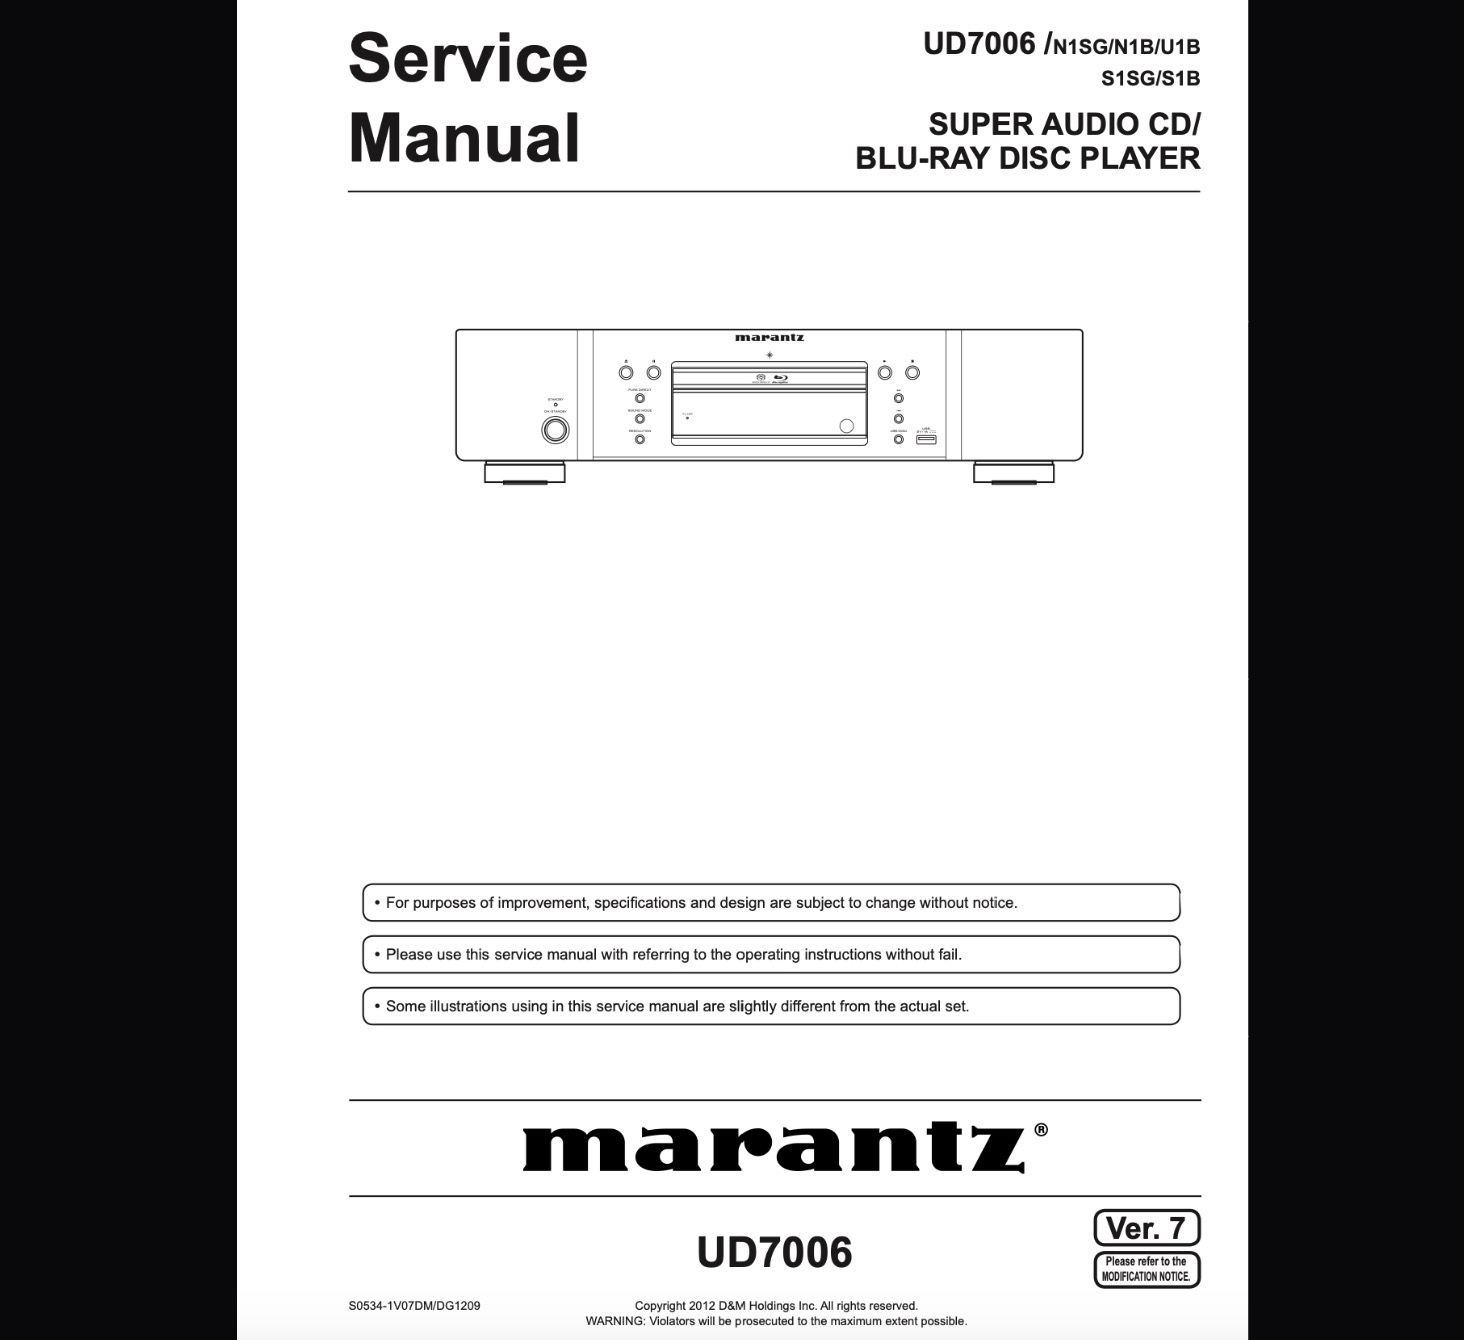 Marantz UD7006 / N1SG / N1B / U1B S1SG / S1B SUPER AUDIO CD /  BLU-RAY DISC PLAYER Service Manual, Exploded View, Schematic Diagram, Cirquit Description